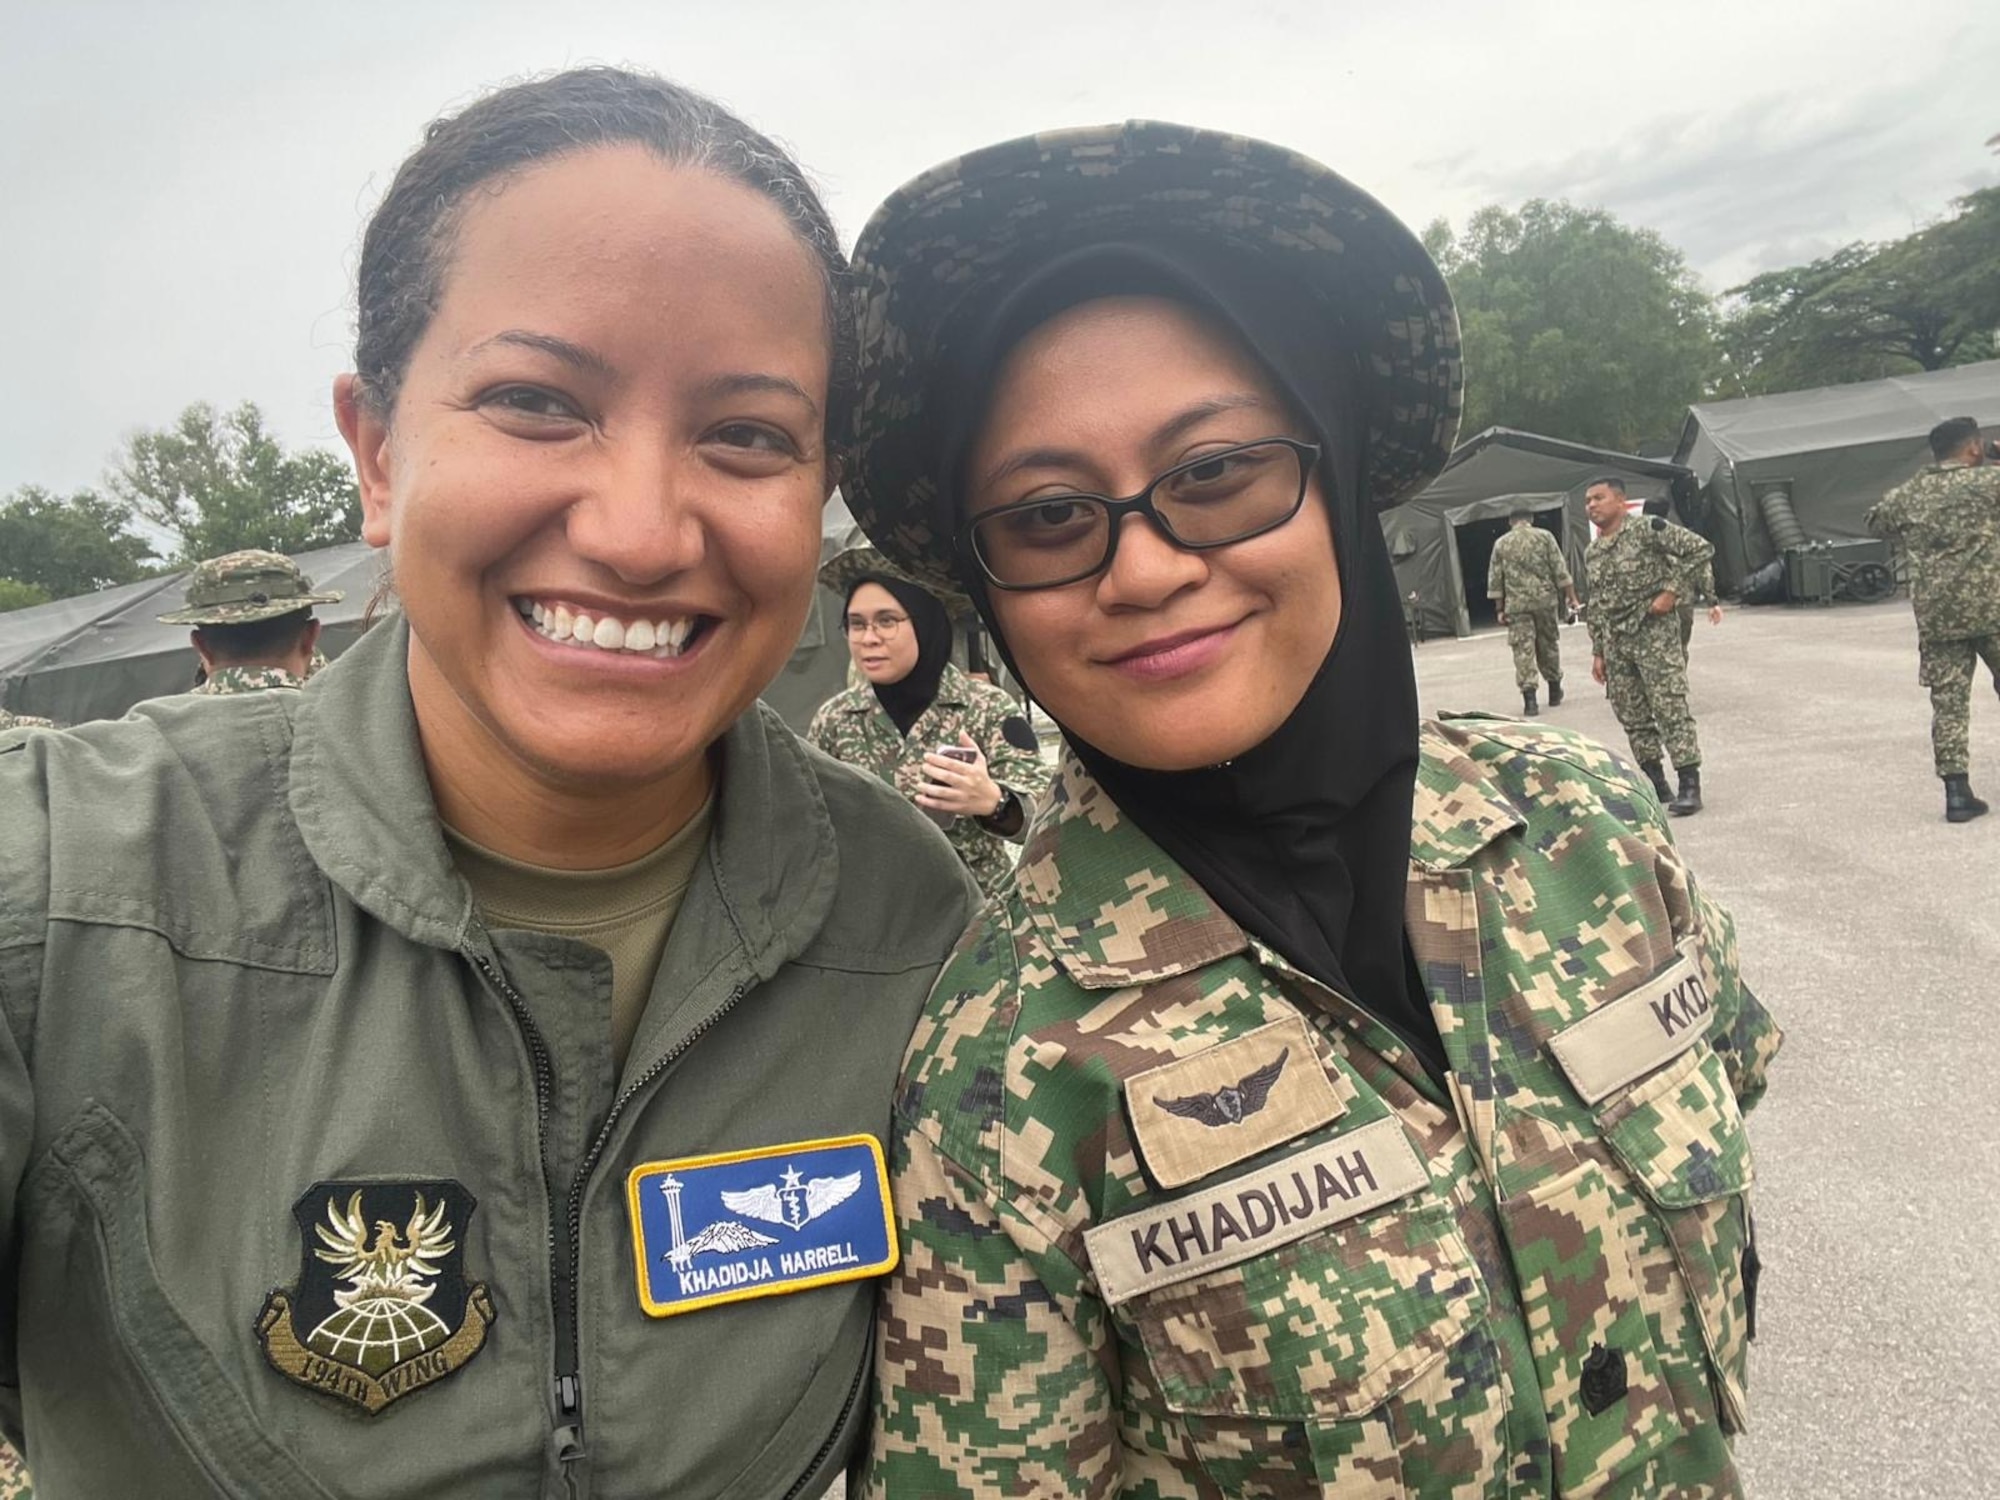 Lt. Col. Khadidja Harrell, a flight surgeon with the 194th Medical Group, poses for a photo with her Malaysian counterpart during the Indo-Pacific Military Health Exchange Sept. 26-29, 2023, in Kuala Lumpur, Malaysia. The multilateral military event focused on global health interoperability.